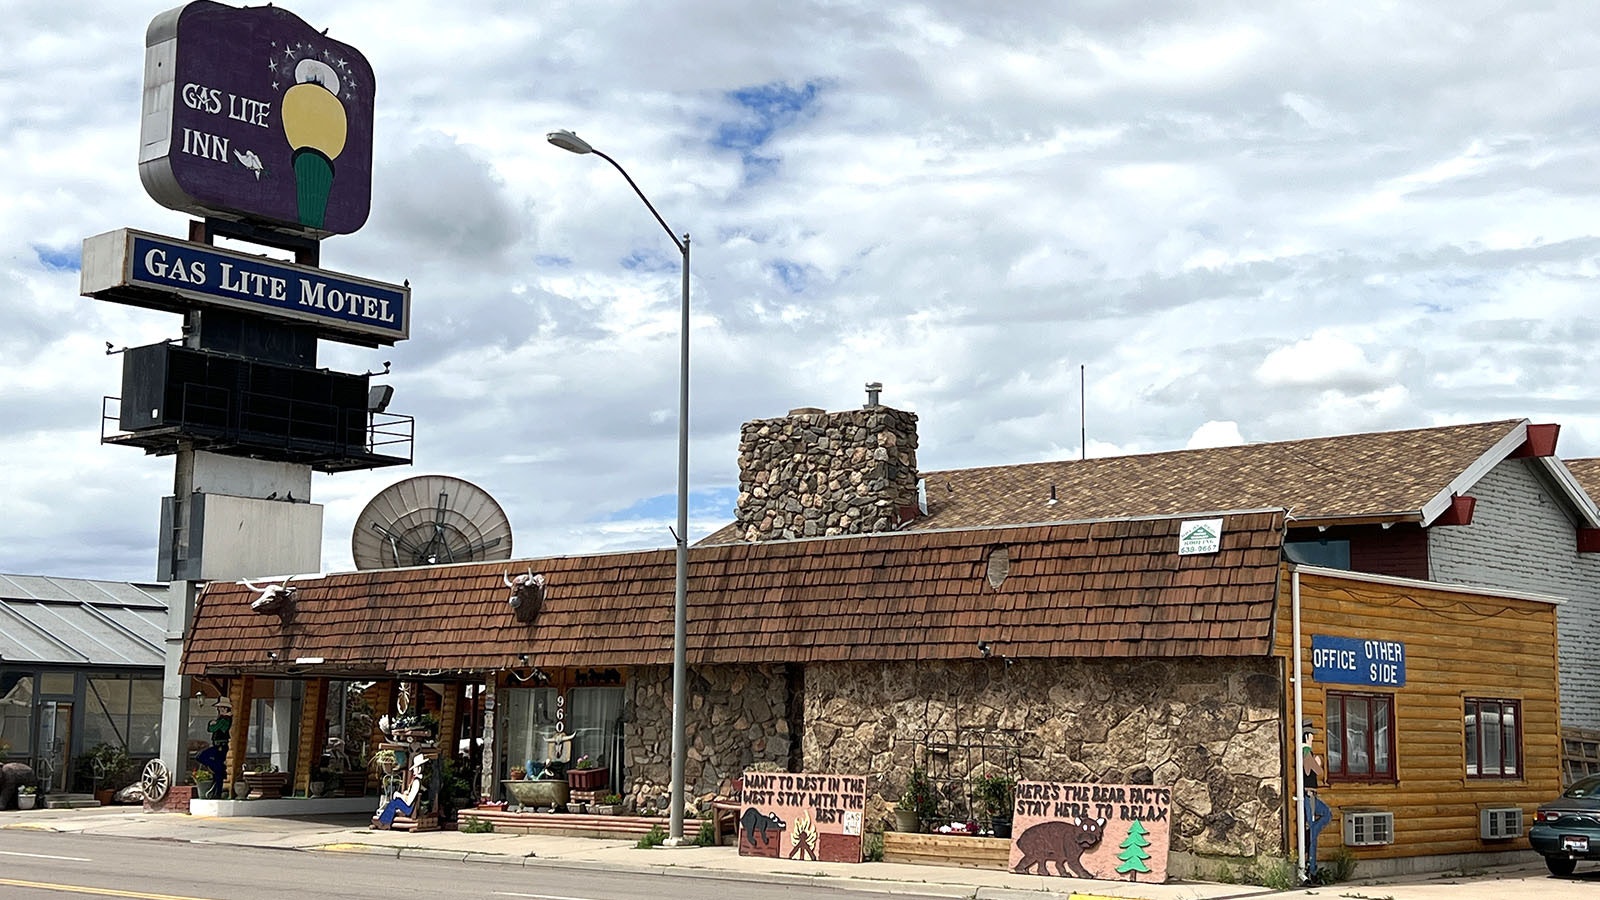 The Gas Lite Motel on Third Street in Laramie was the scene of a murder and grisly attempt to dismember the body in June 2022.